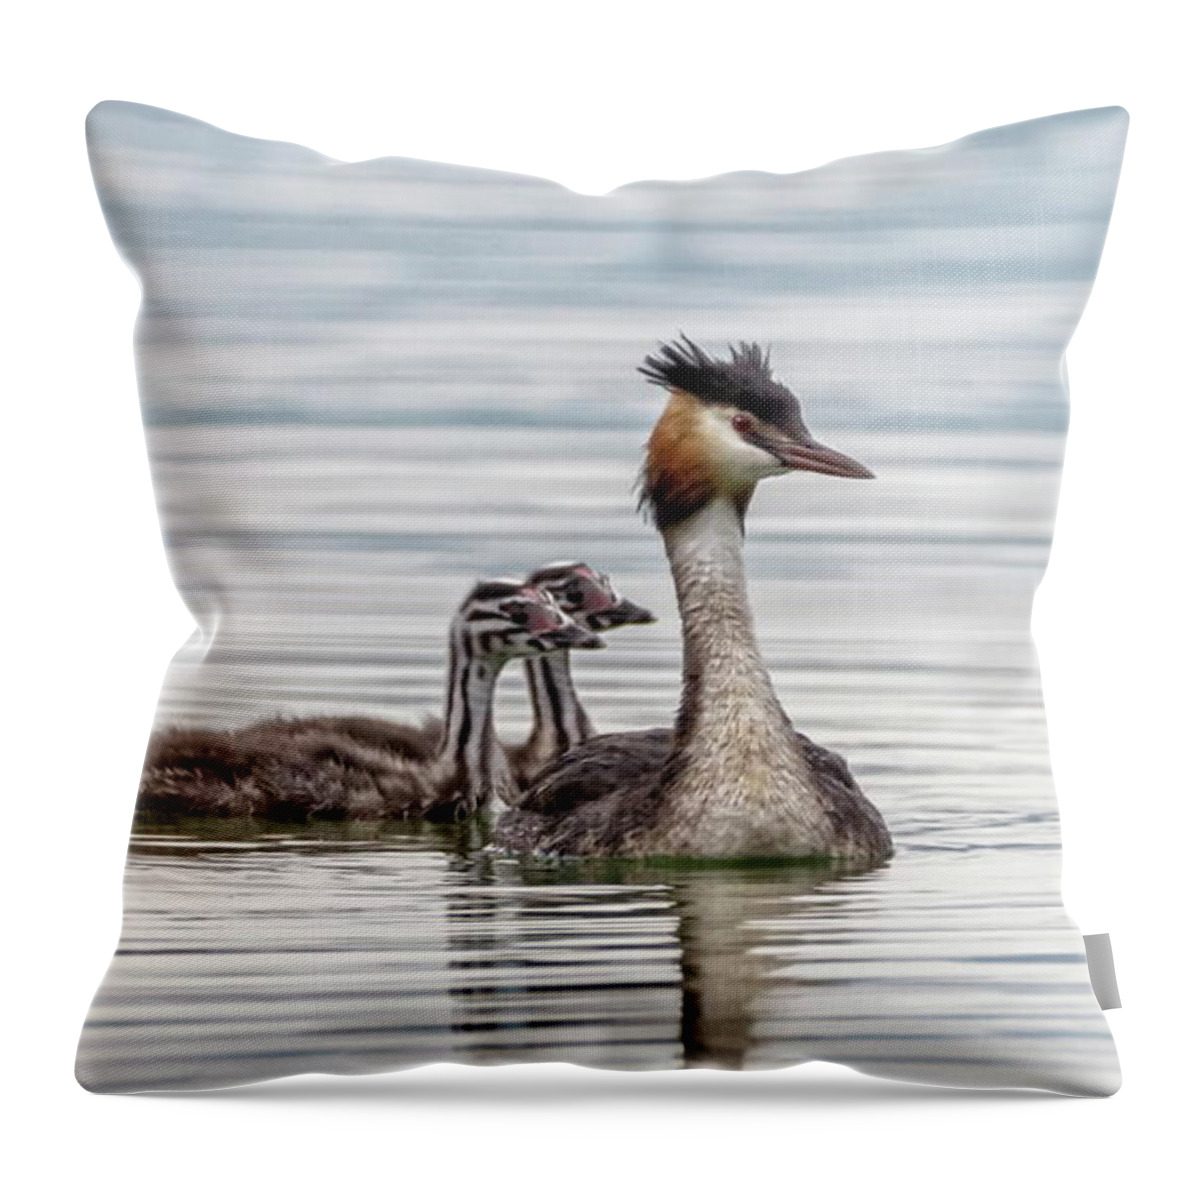 Grebe Throw Pillow featuring the photograph Crested grebe, podiceps cristatus, duck and babies by Elenarts - Elena Duvernay photo